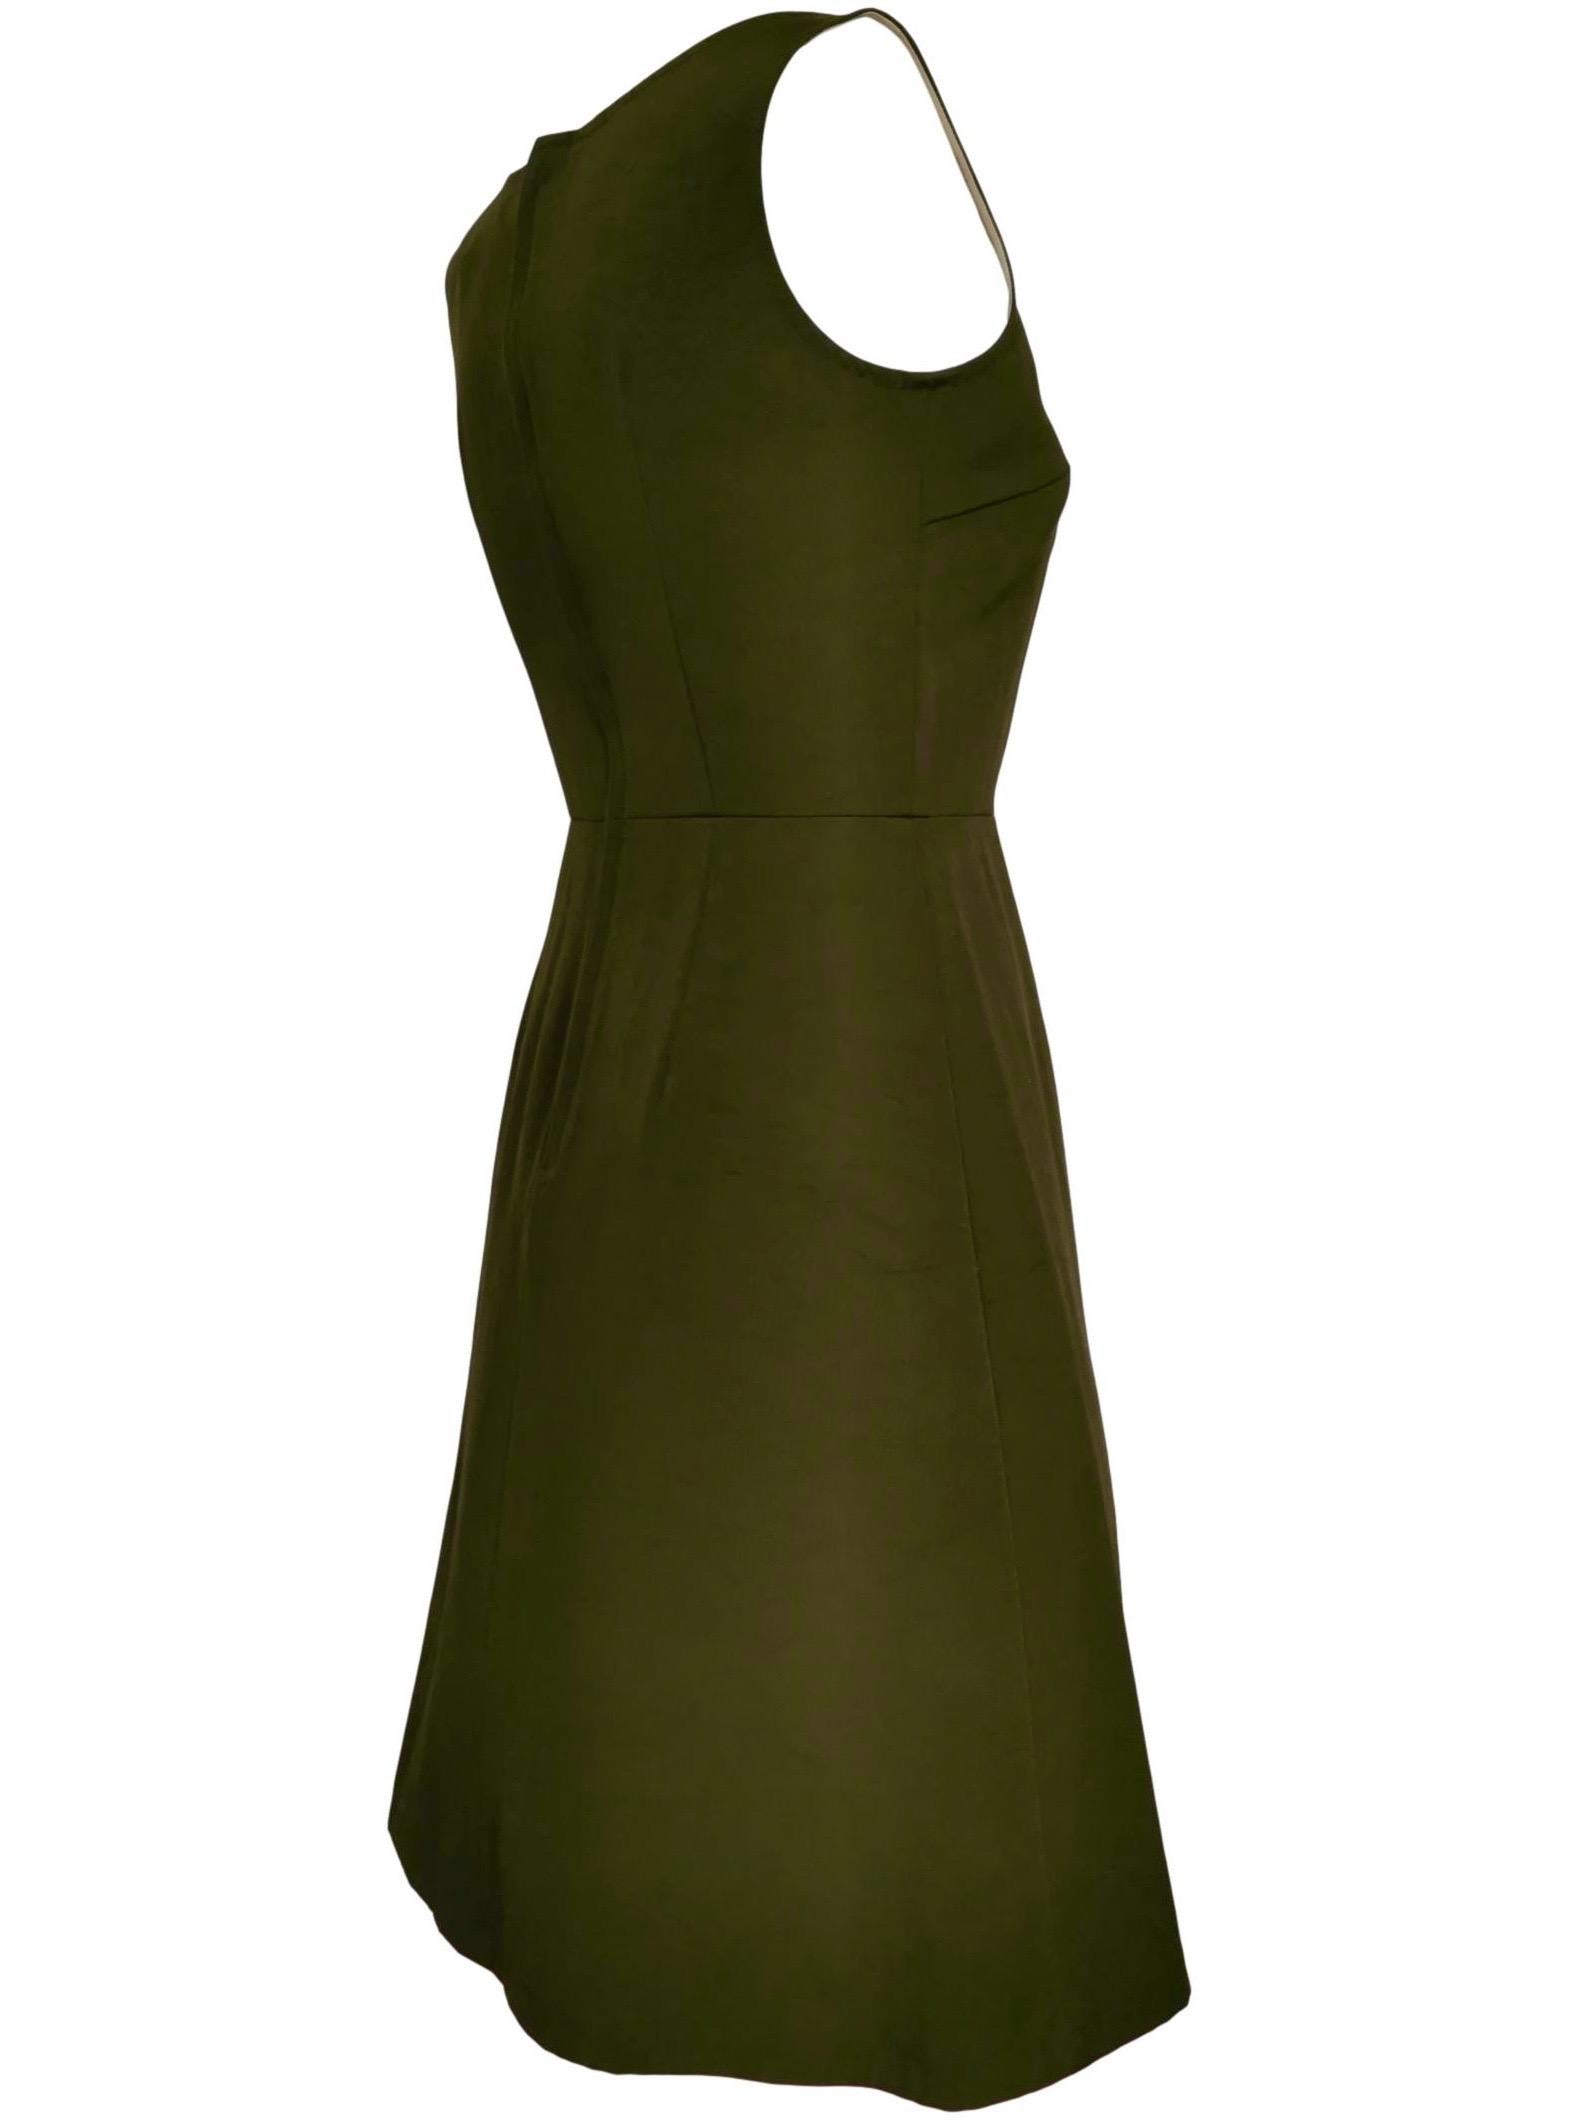 Comme des Garcons Army Green Dress AD 1999 For Sale 6